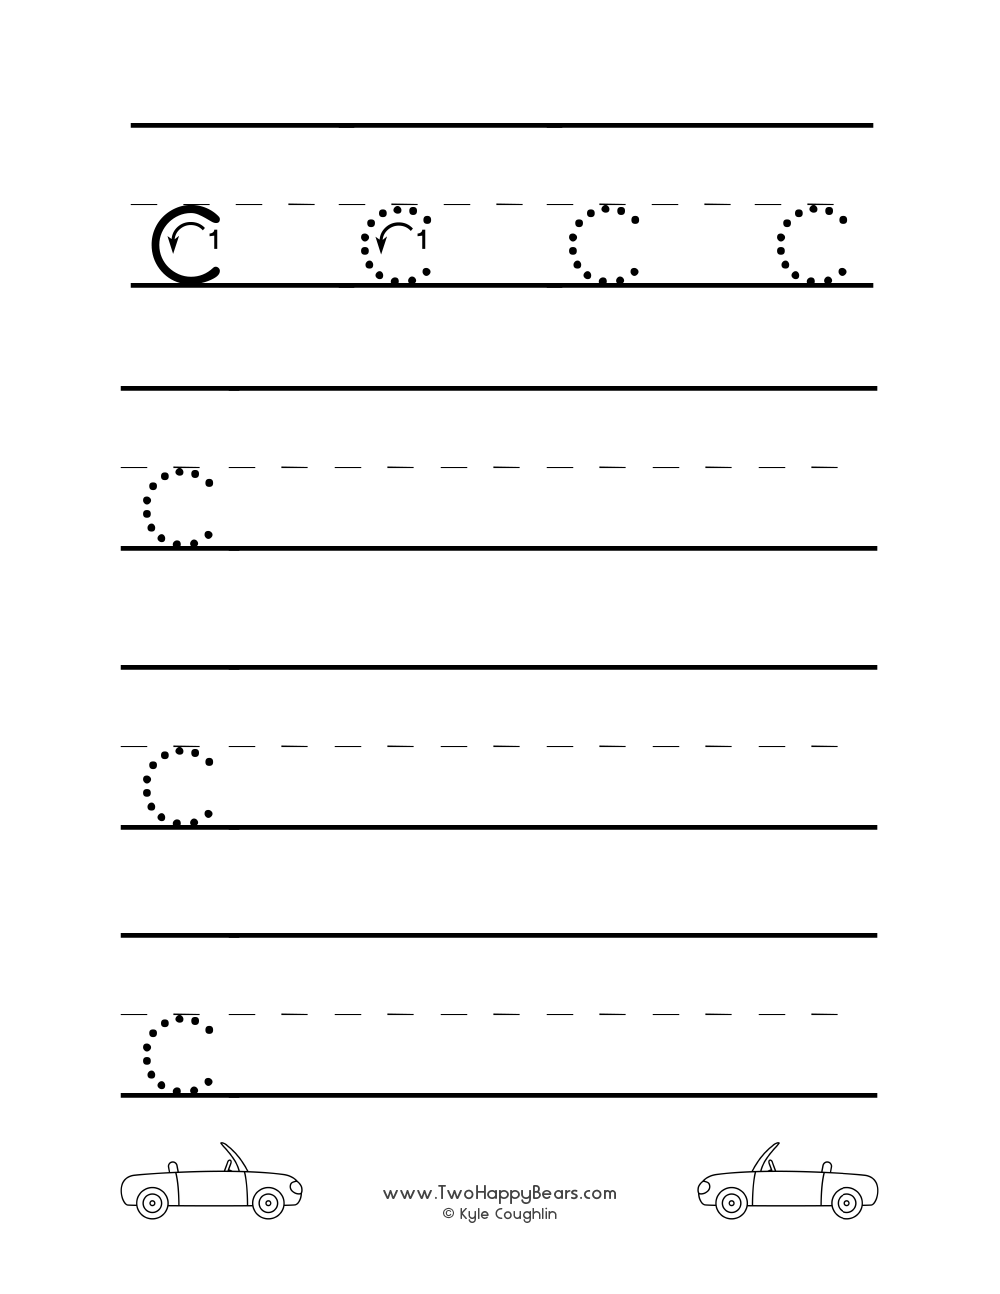 Lowercase letter C worksheet for tracing and drawing